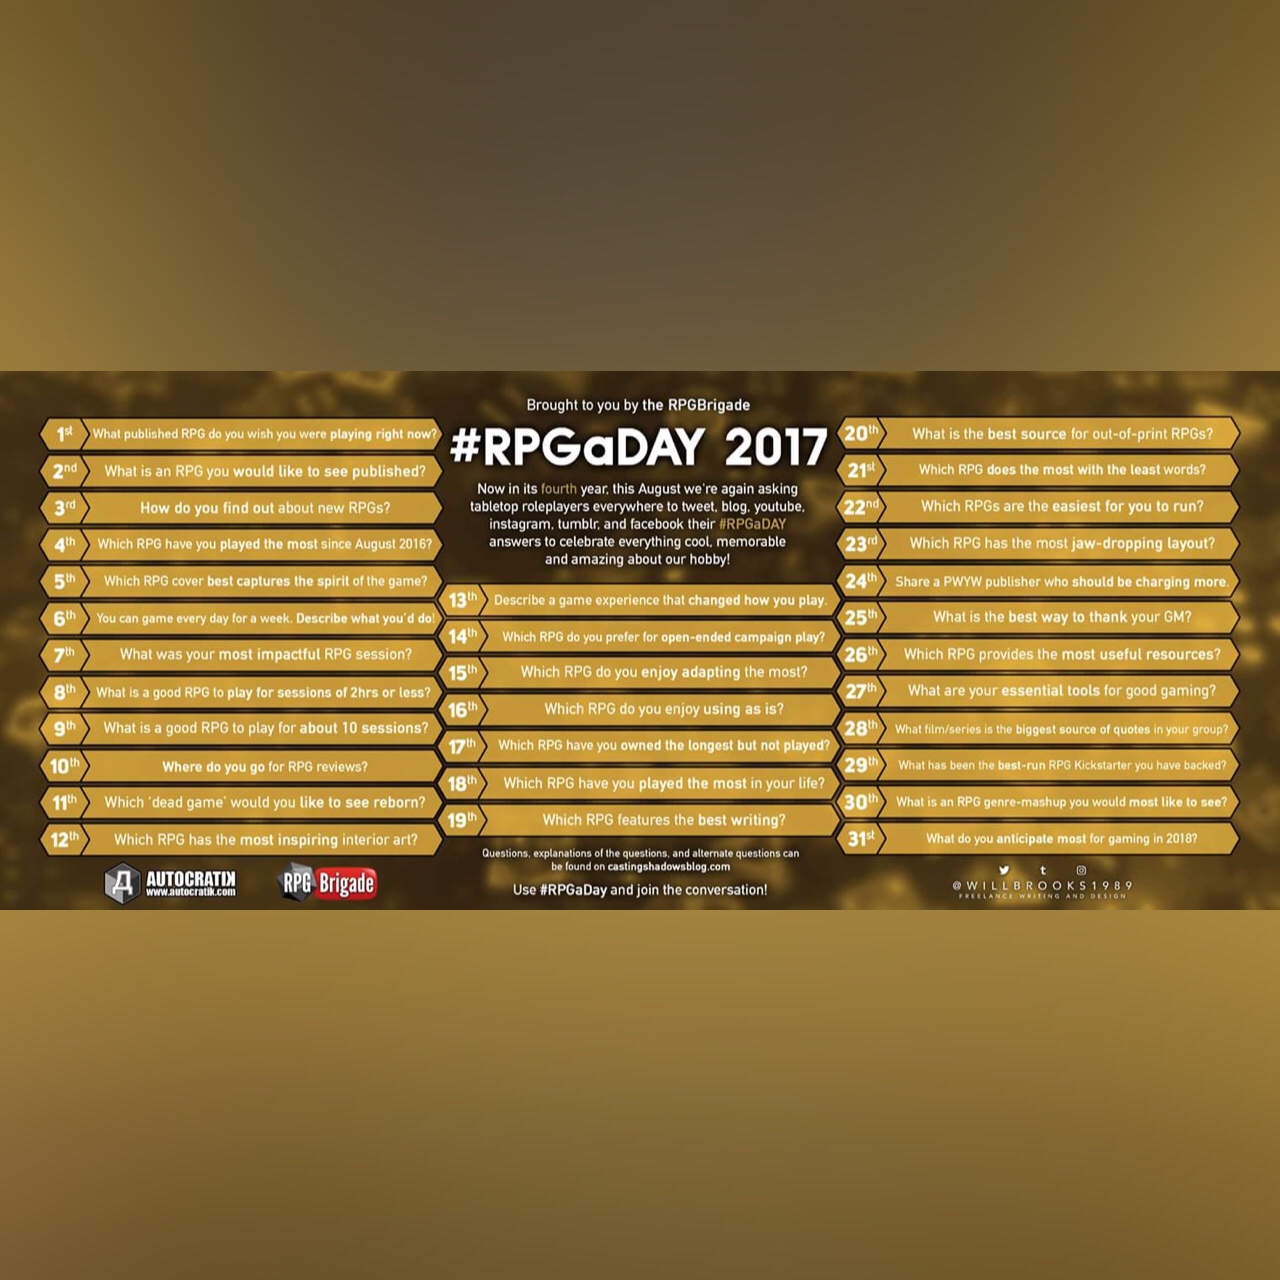 RPGaDAY 2017  August 25 What is the best way to thank your GM?